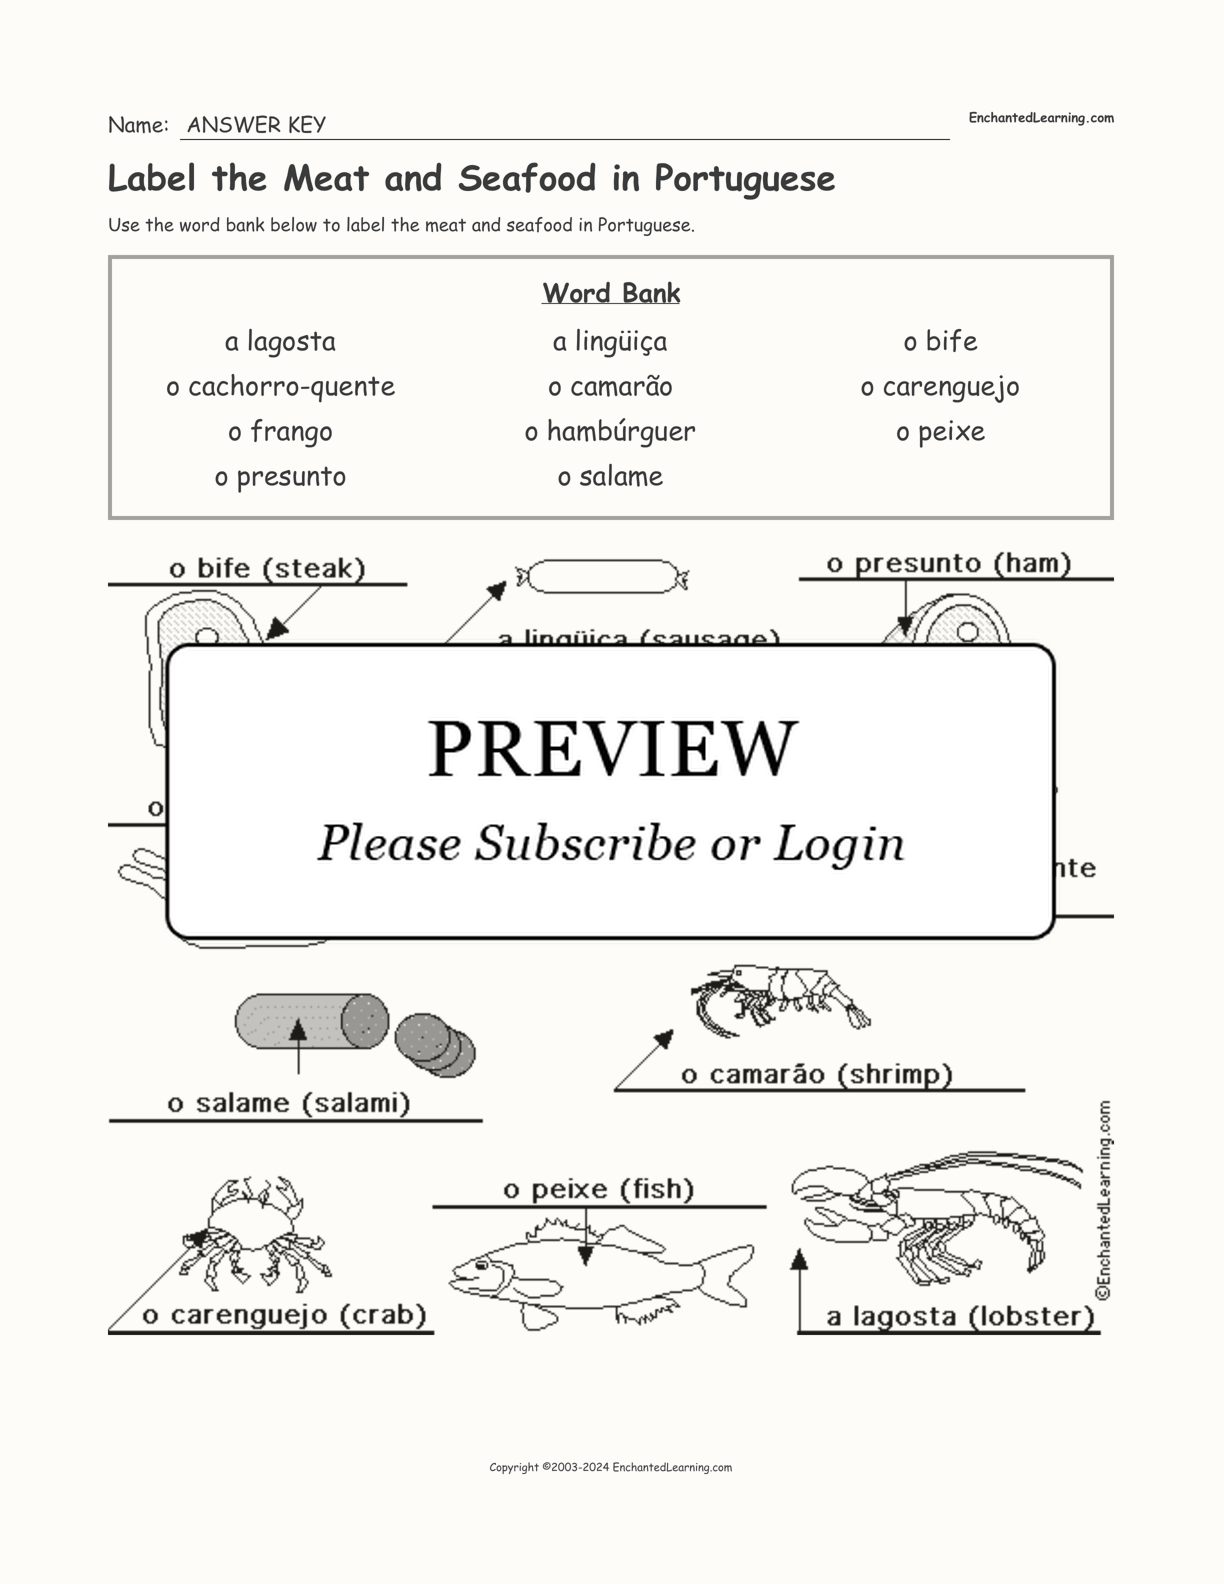 Label the Meat and Seafood in Portuguese interactive worksheet page 2